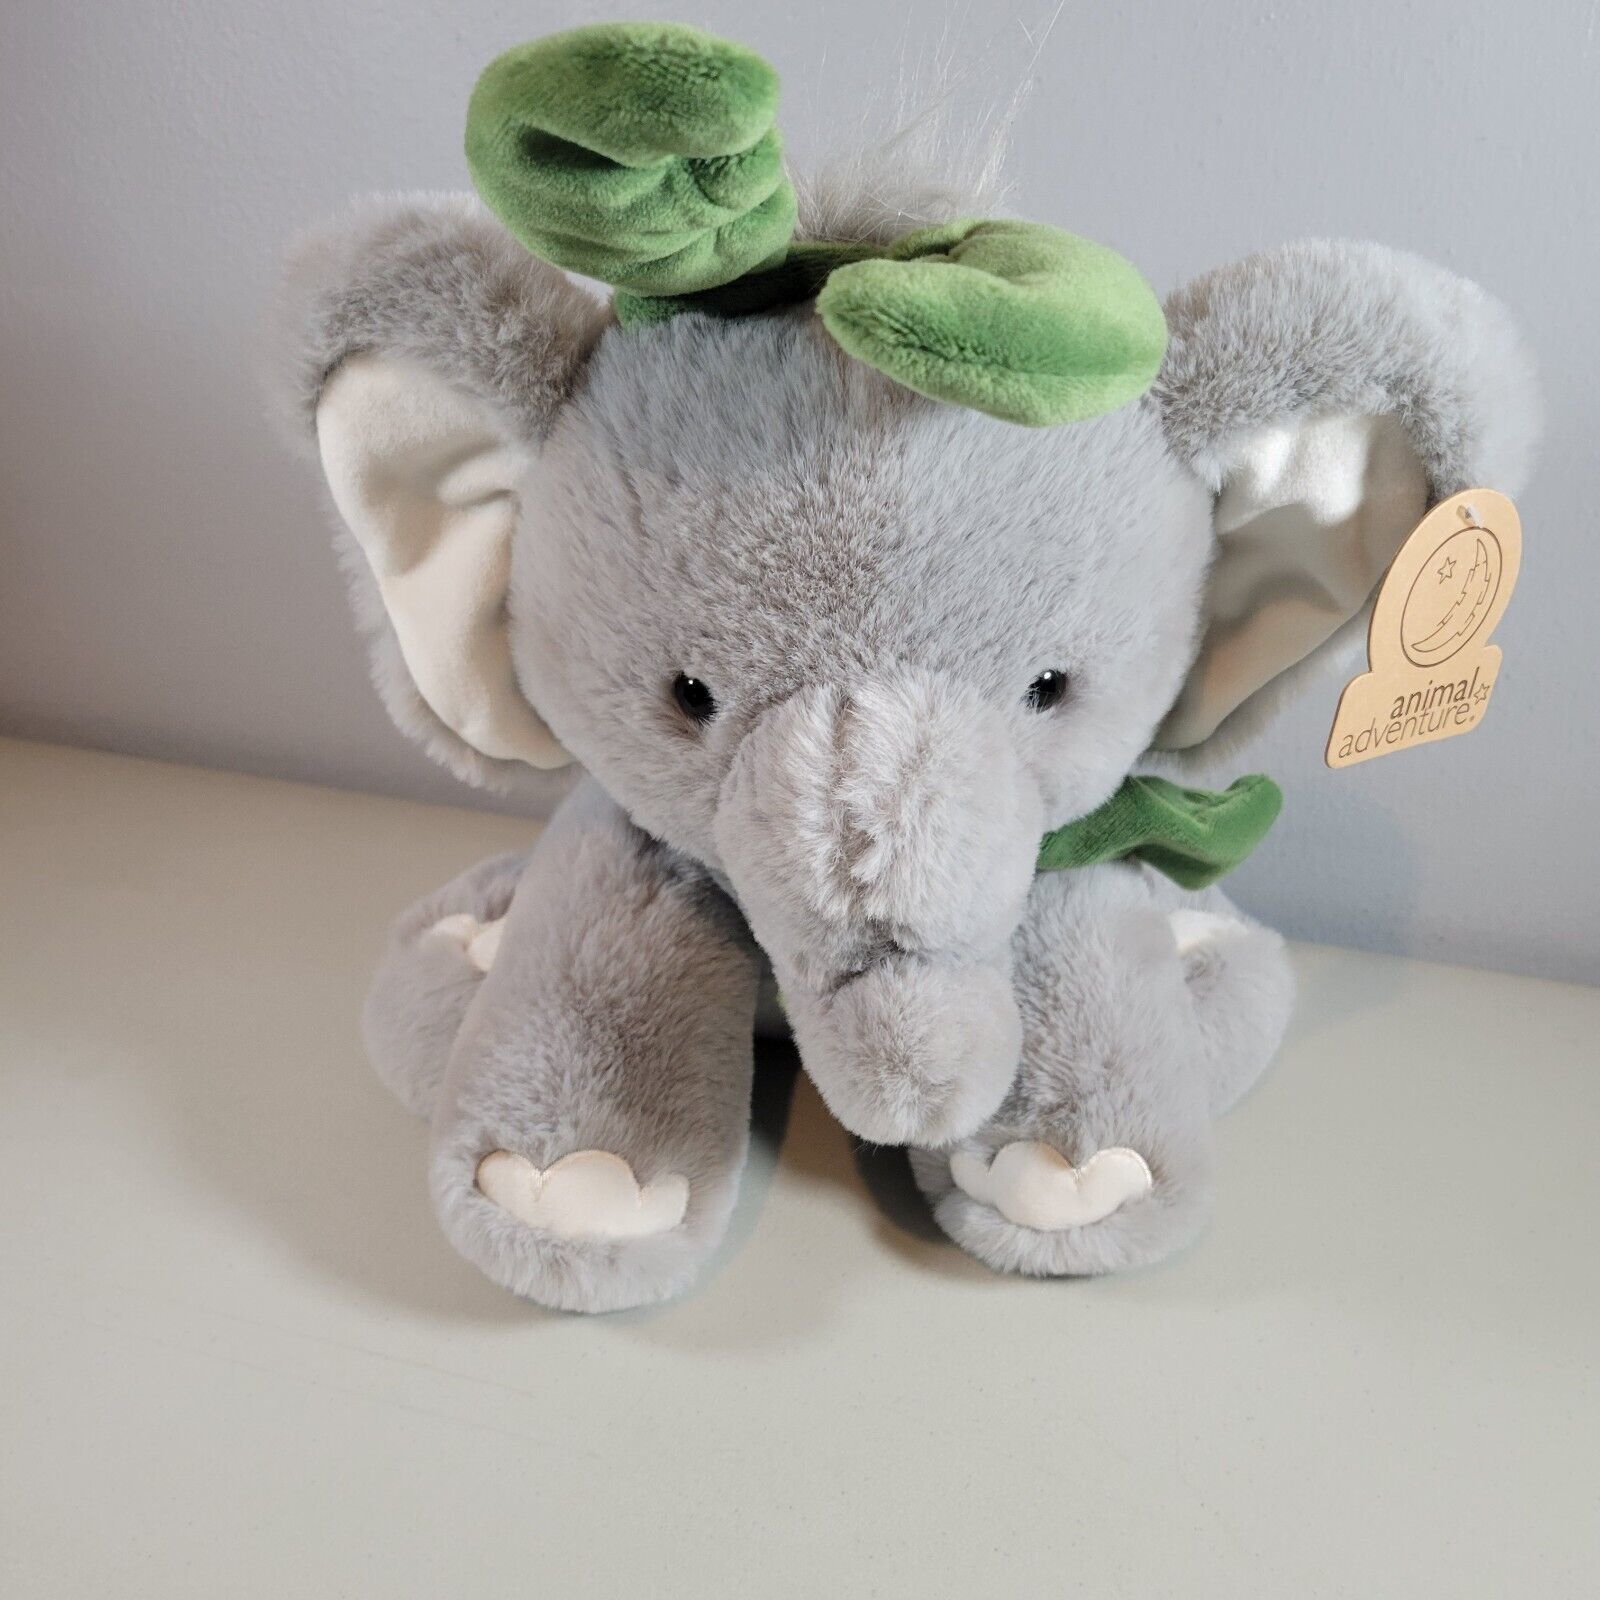 Elephant Stuffed Plush New with Tags Green Scarf Antlers Animal Adventure 11" - $14.31